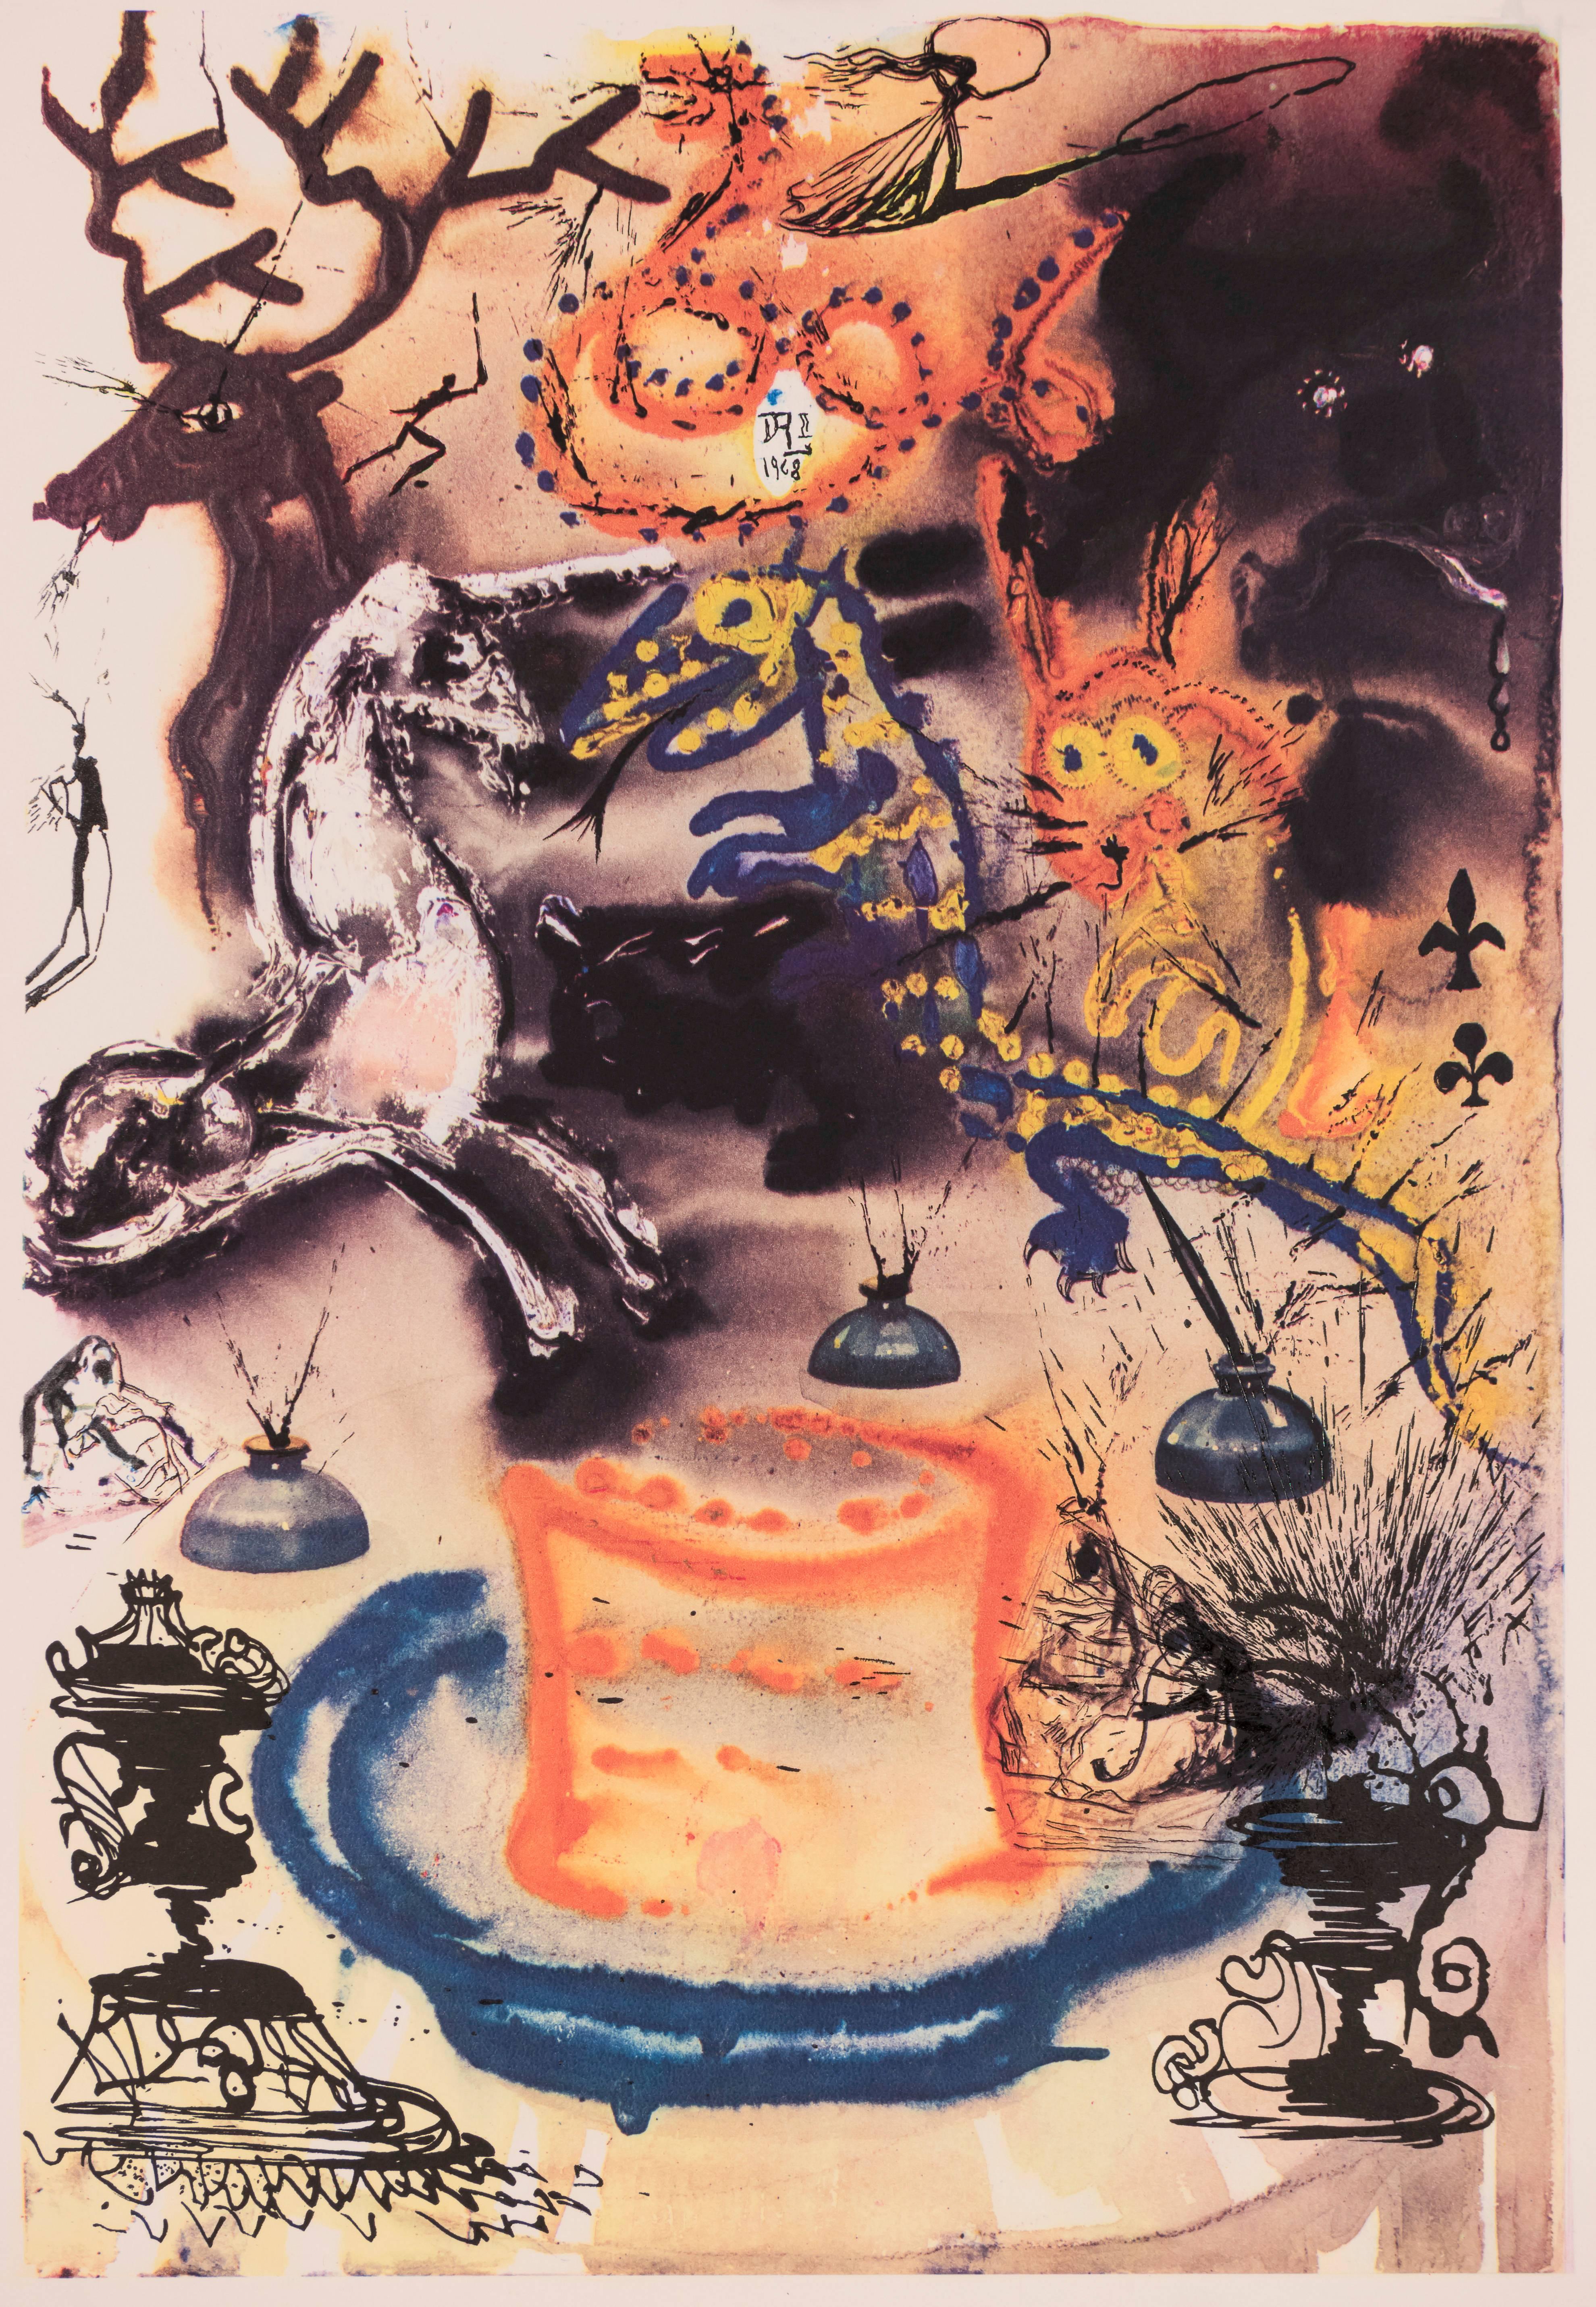 Salvador Dalí Abstract Print - Who Stole the Tarts?  Edition of 200.